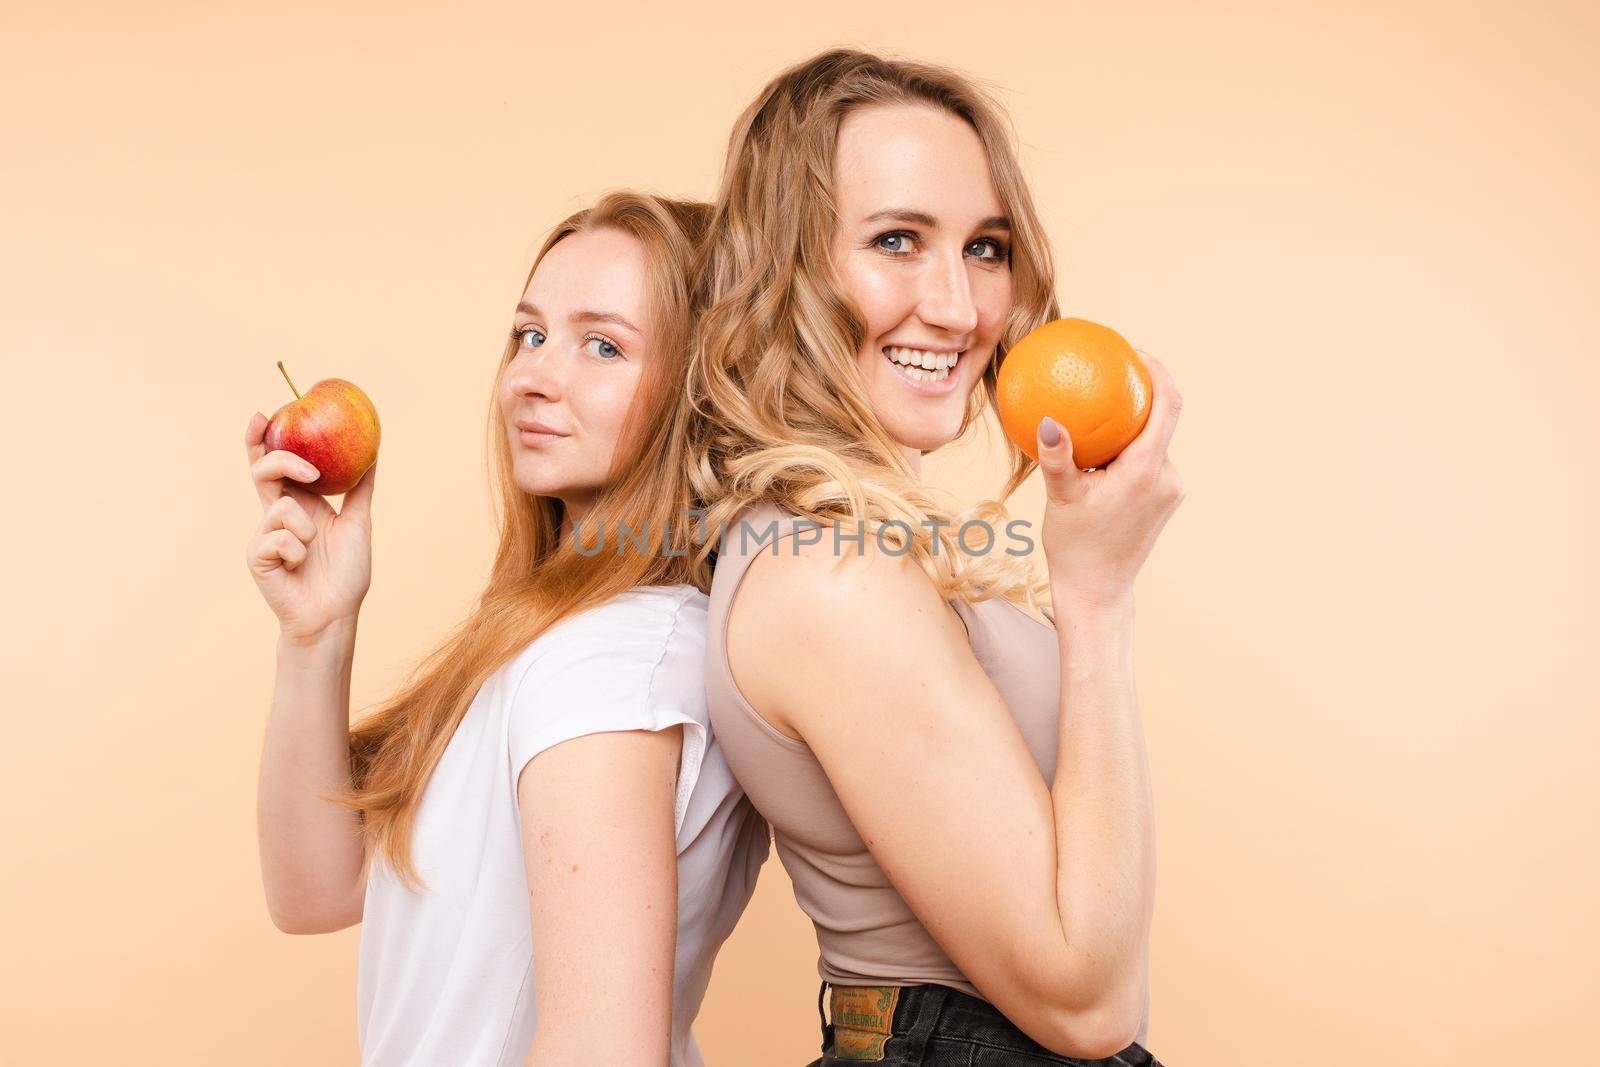 Side view of two beautiful friends standing back to back and looking at camera with smile. Girl on the right holding bright juicy orange. Healthy food concept.